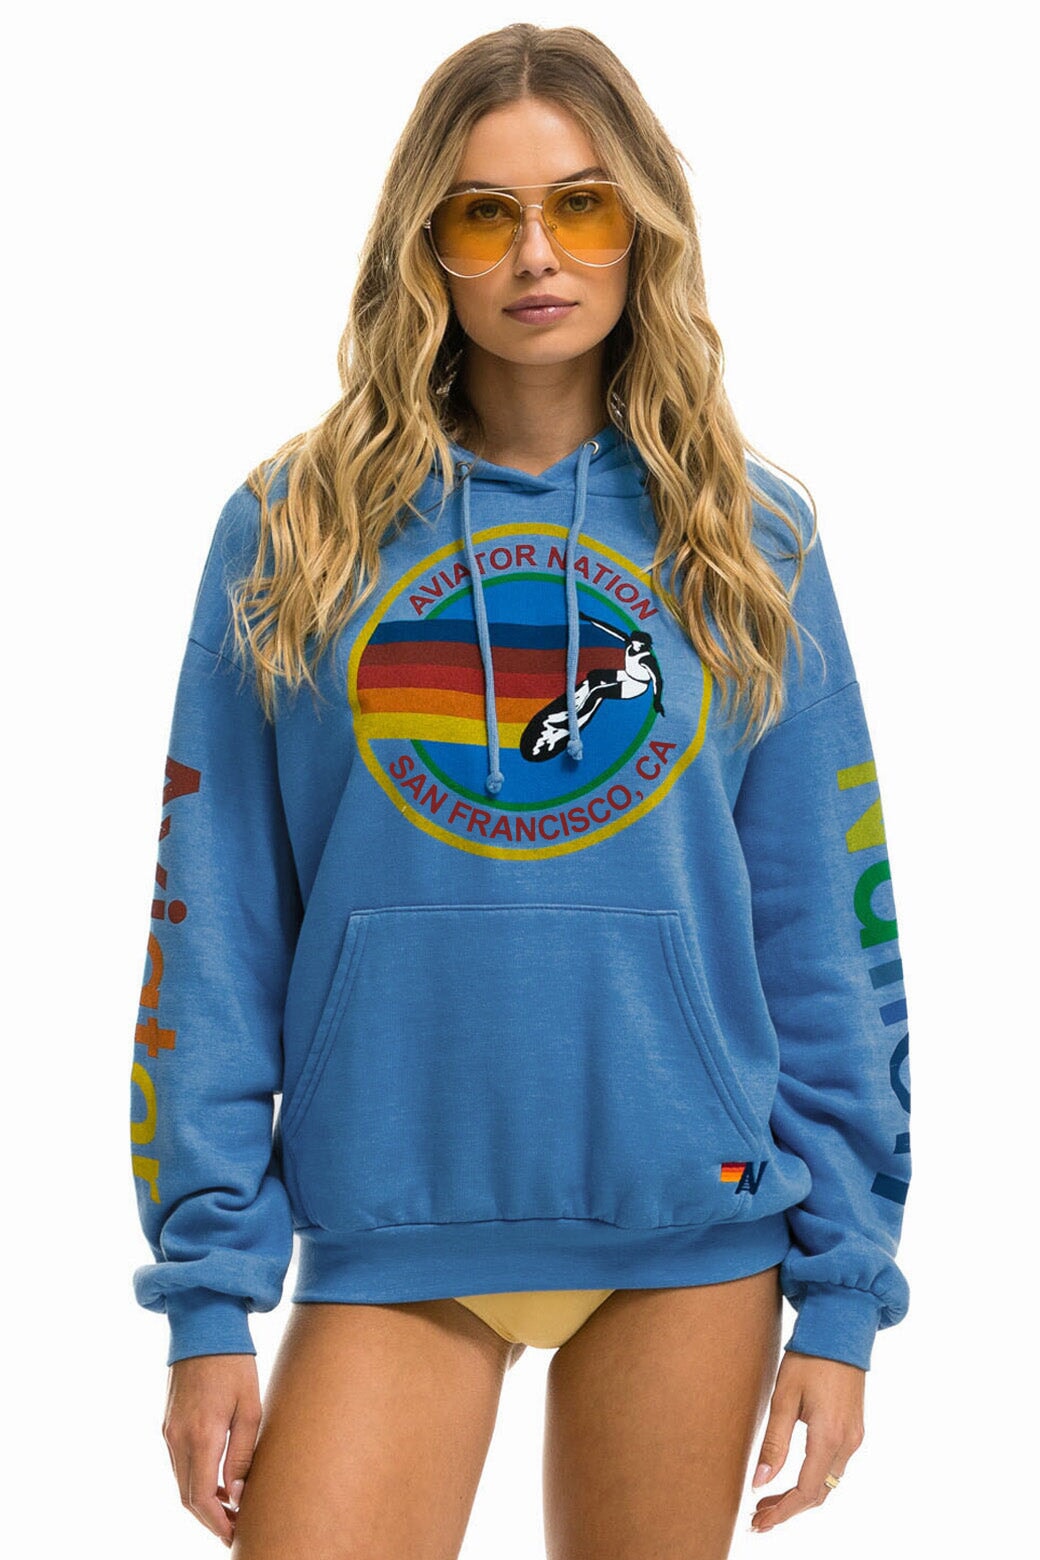 AVIATOR NATION SAN FRANCISCO RELAXED PULLOVER HOODIE - COBALT Hoodie Aviator Nation 